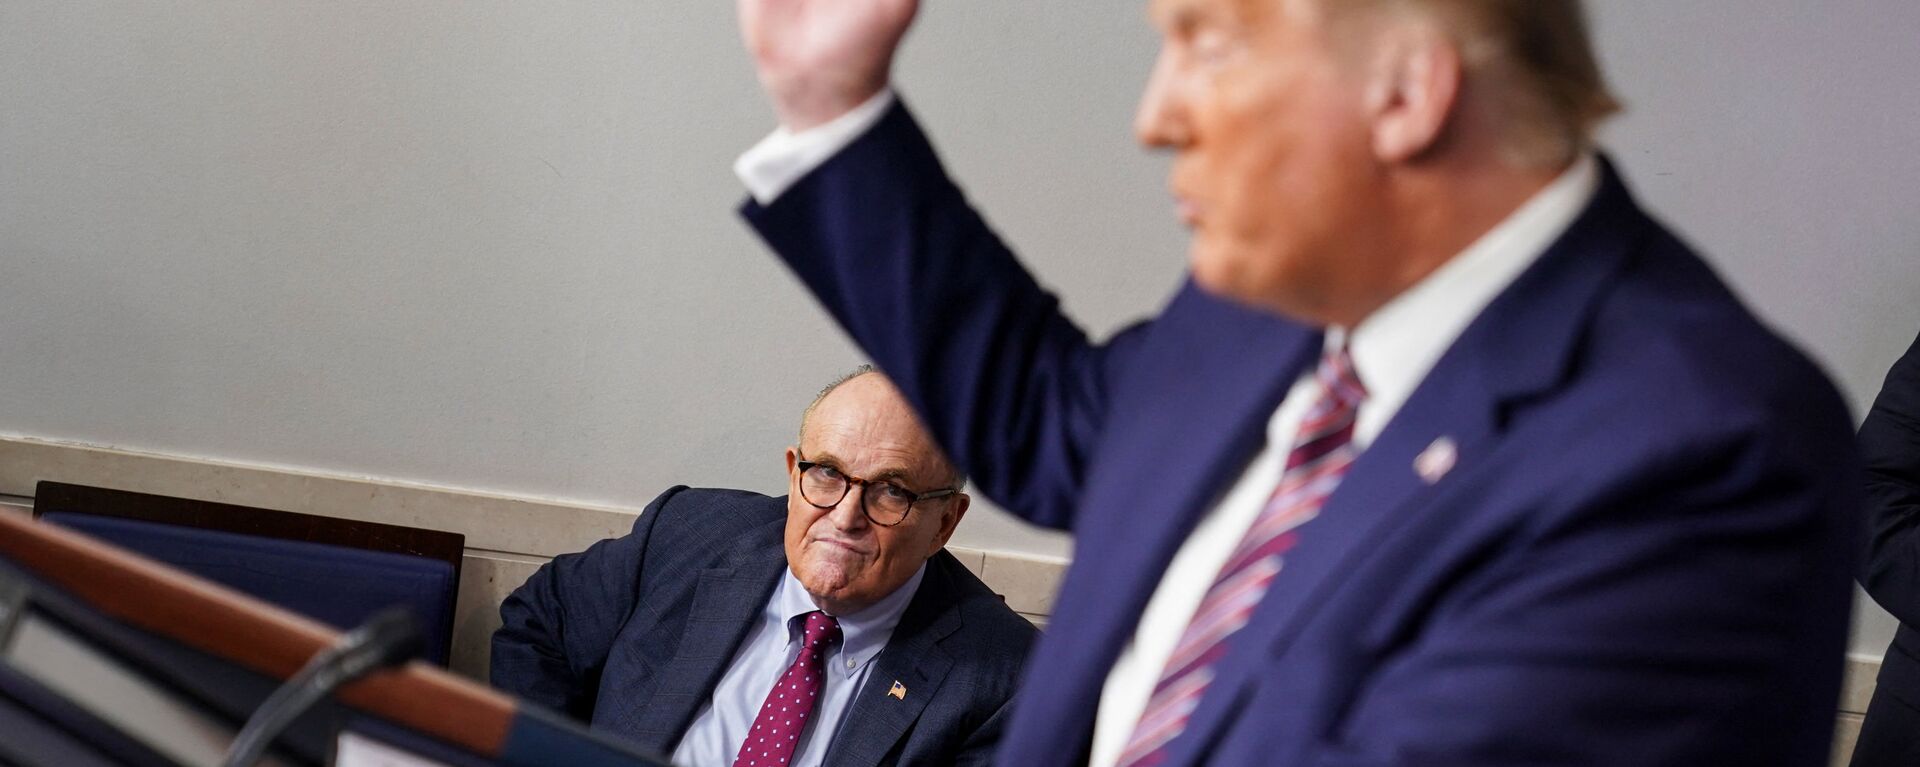 Former New York Mayor Rudy Giuliani listens as U.S. President Donald Trump speaks during a news conference in the Briefing Room of the White House on September 27, 2020 in Washington, DC. - Sputnik International, 1920, 18.01.2022